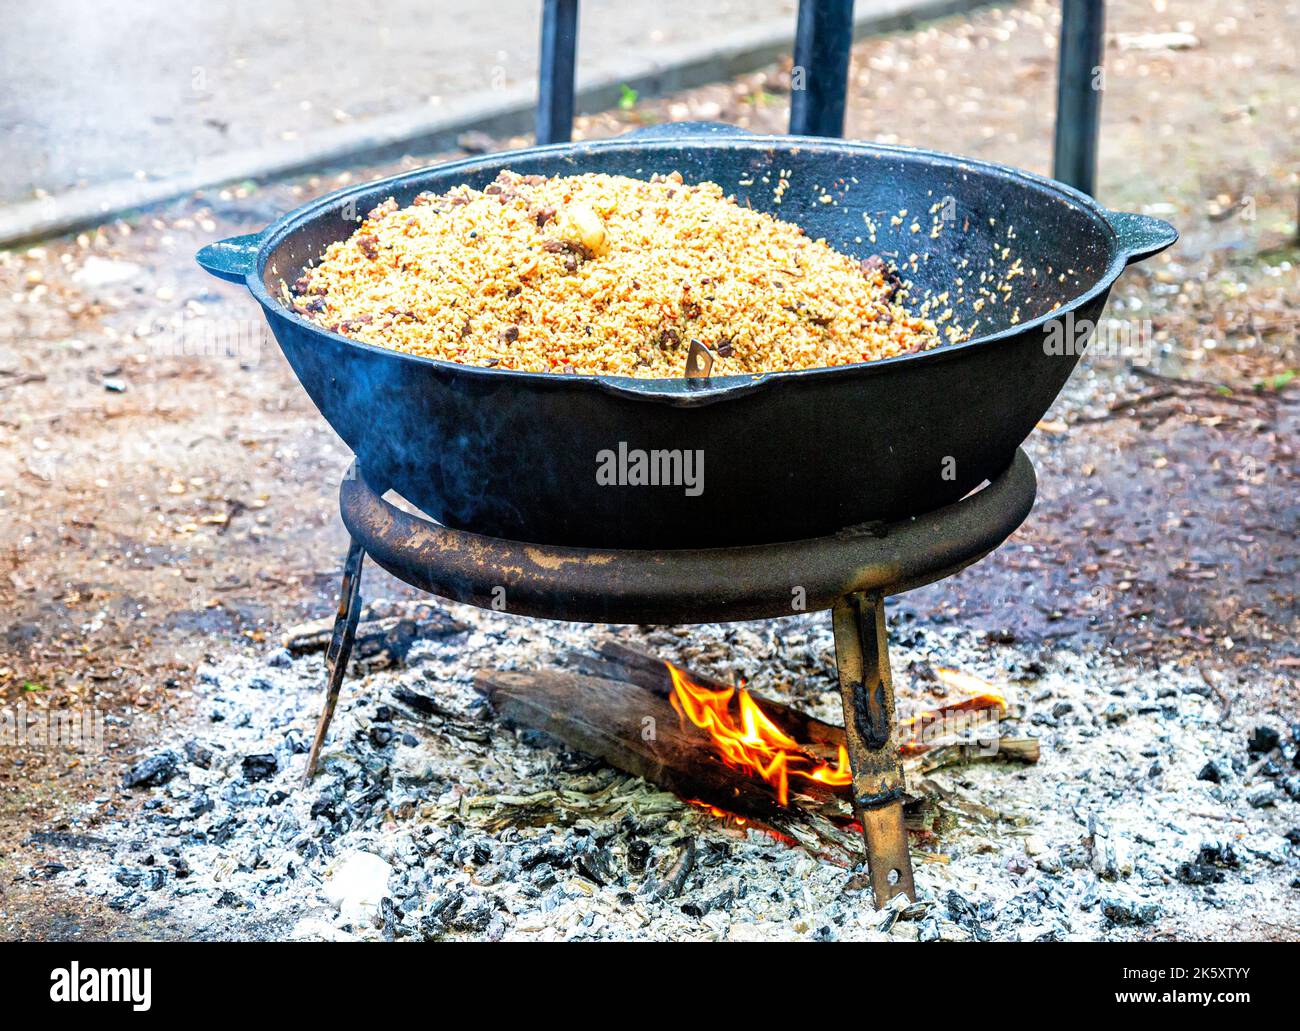 https://c8.alamy.com/comp/2K5XTYY/cooking-appetizing-traditional-uzbek-pilaf-in-a-large-cauldron-on-the-open-fire-outdoors-2K5XTYY.jpg